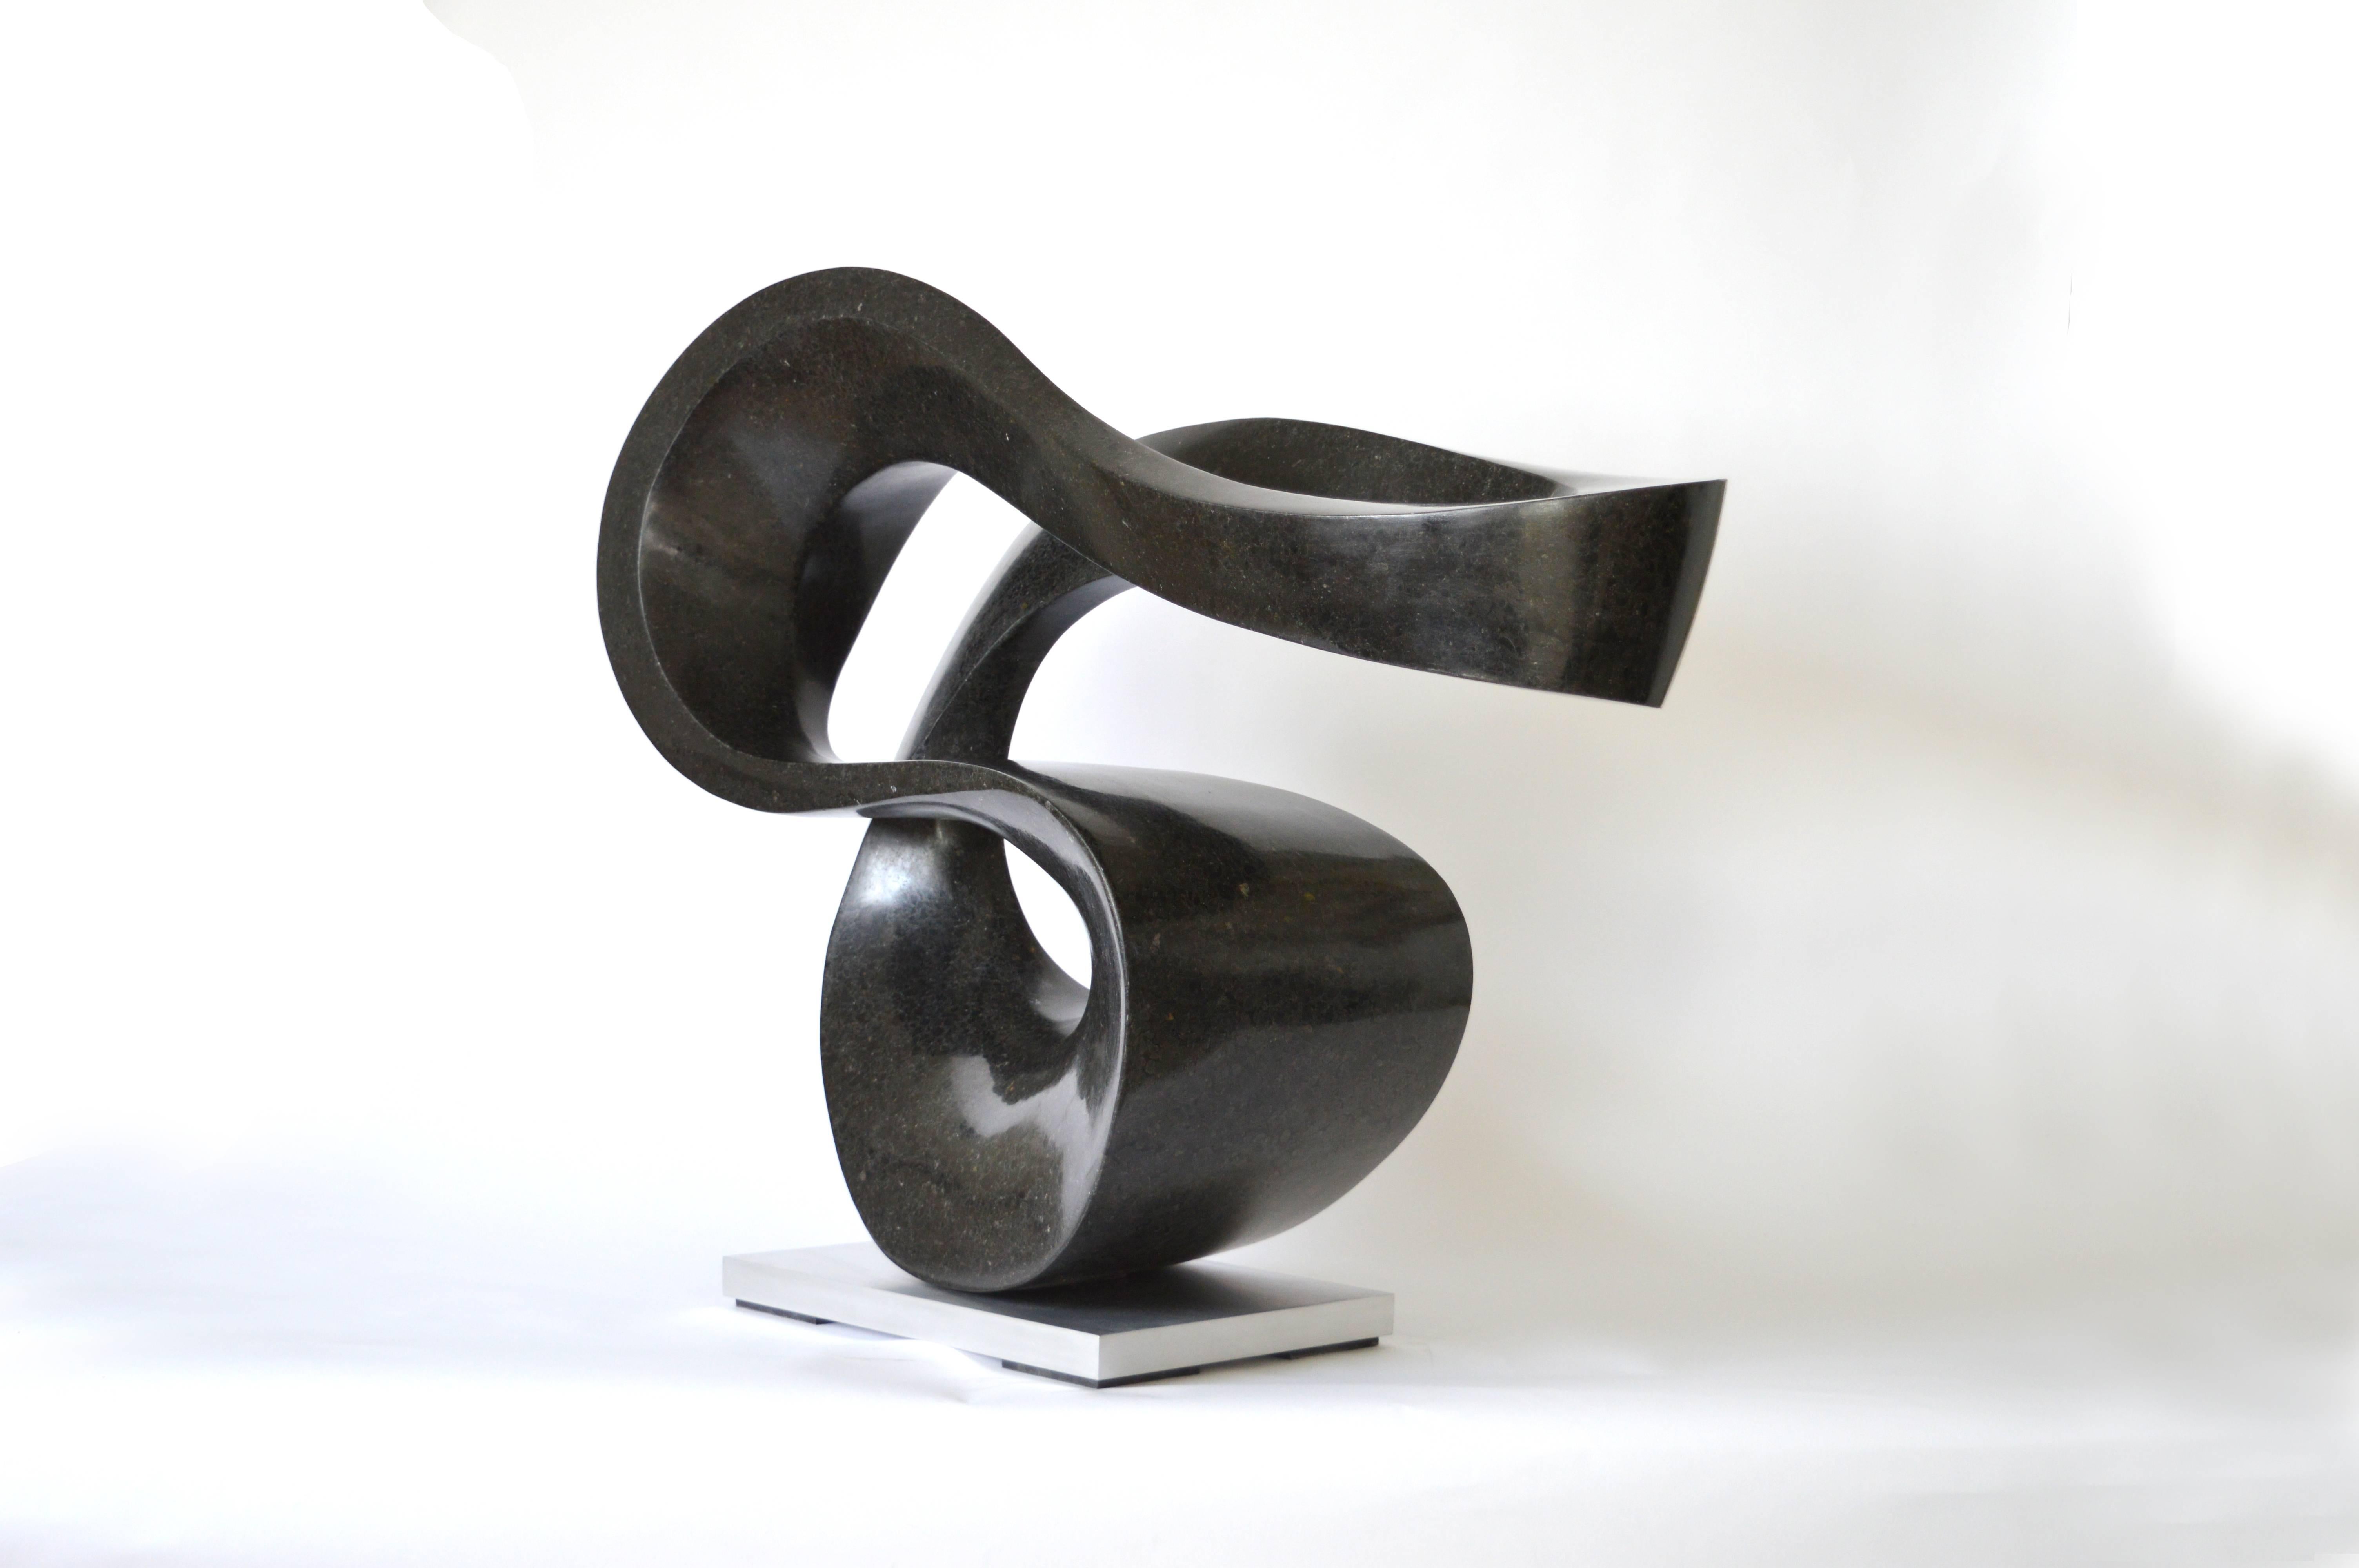 Smooth surfaced, black granite flecked almost imperceptibly with copper and white has been engineered into an elegant ribbon in tangible contrast to its weight.  This work has a steel substructure and sits on an aluminum base. The work is aptly